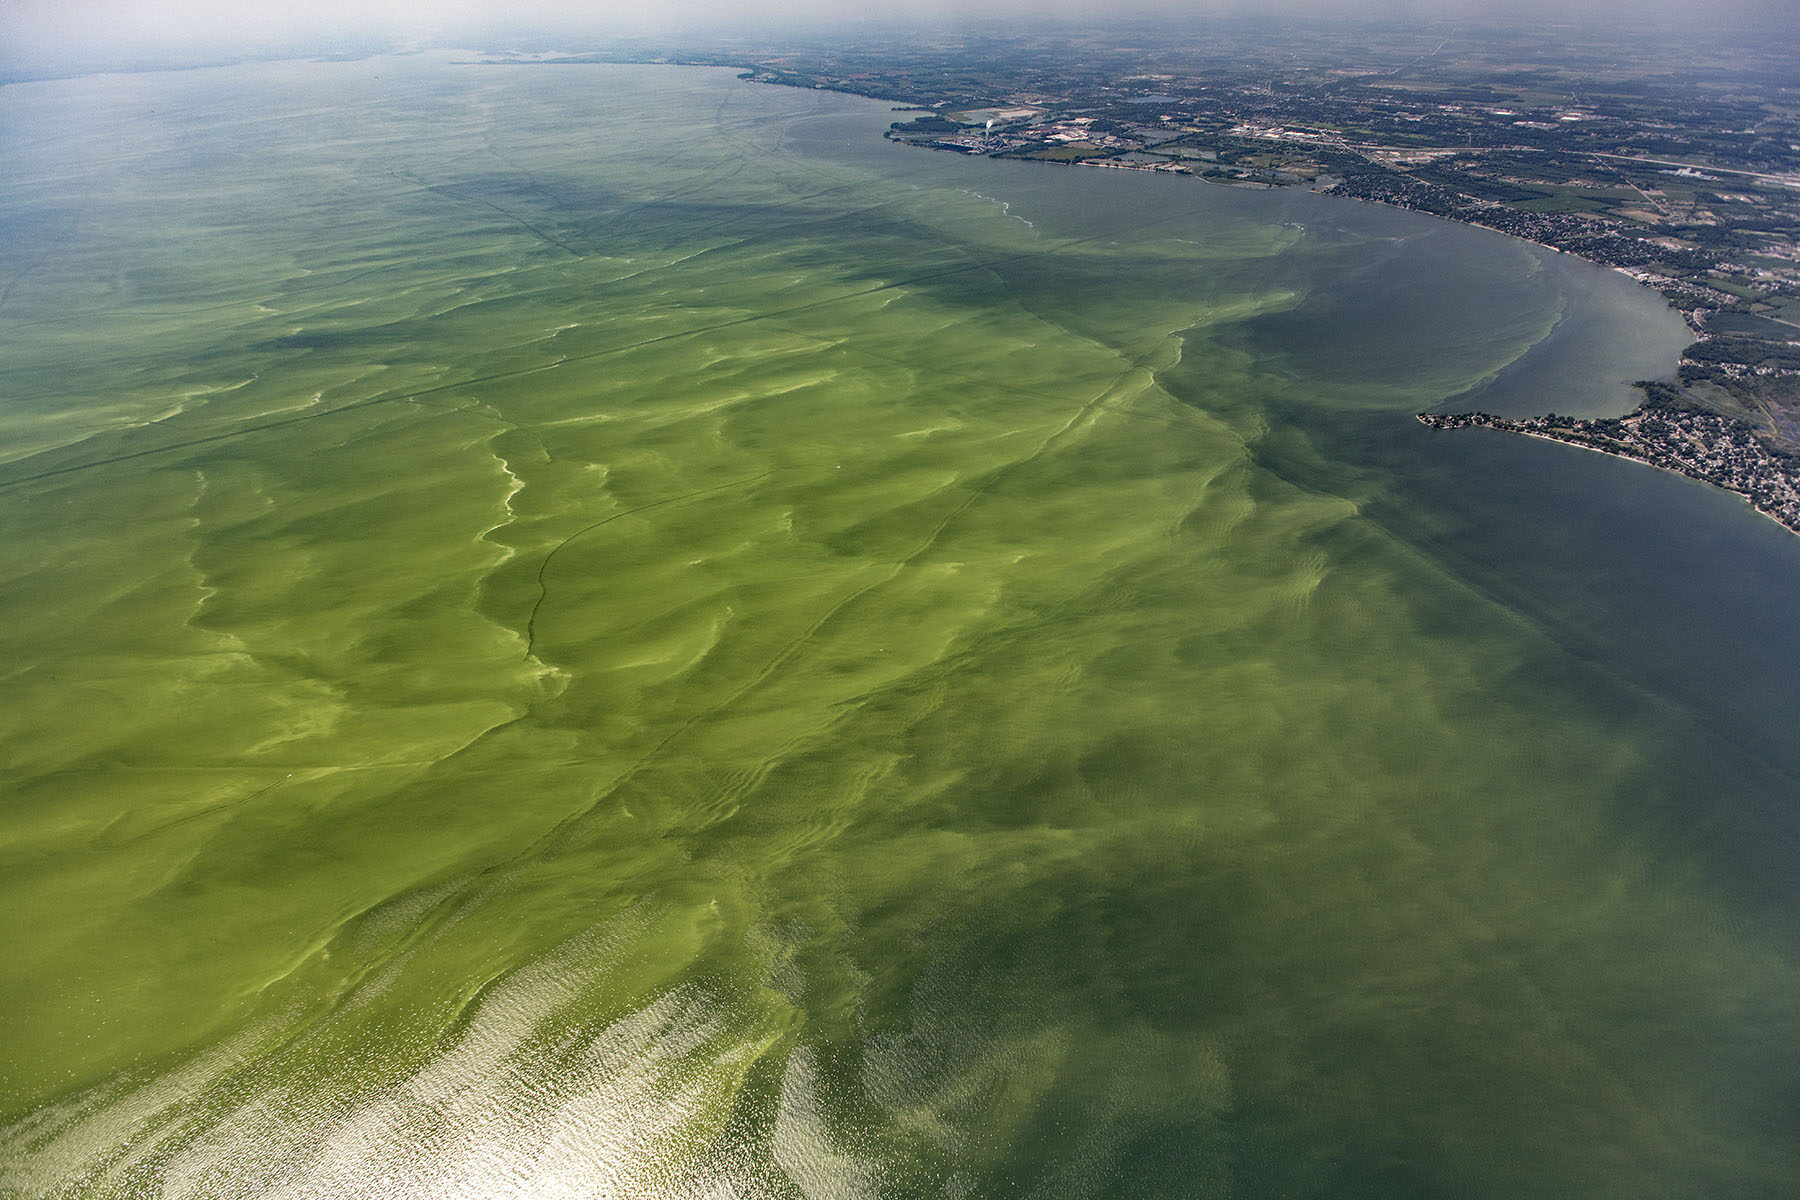 Model Predicts Reducing Only Phosphorus Will Make Lake Erie Algal Blooms More Toxic